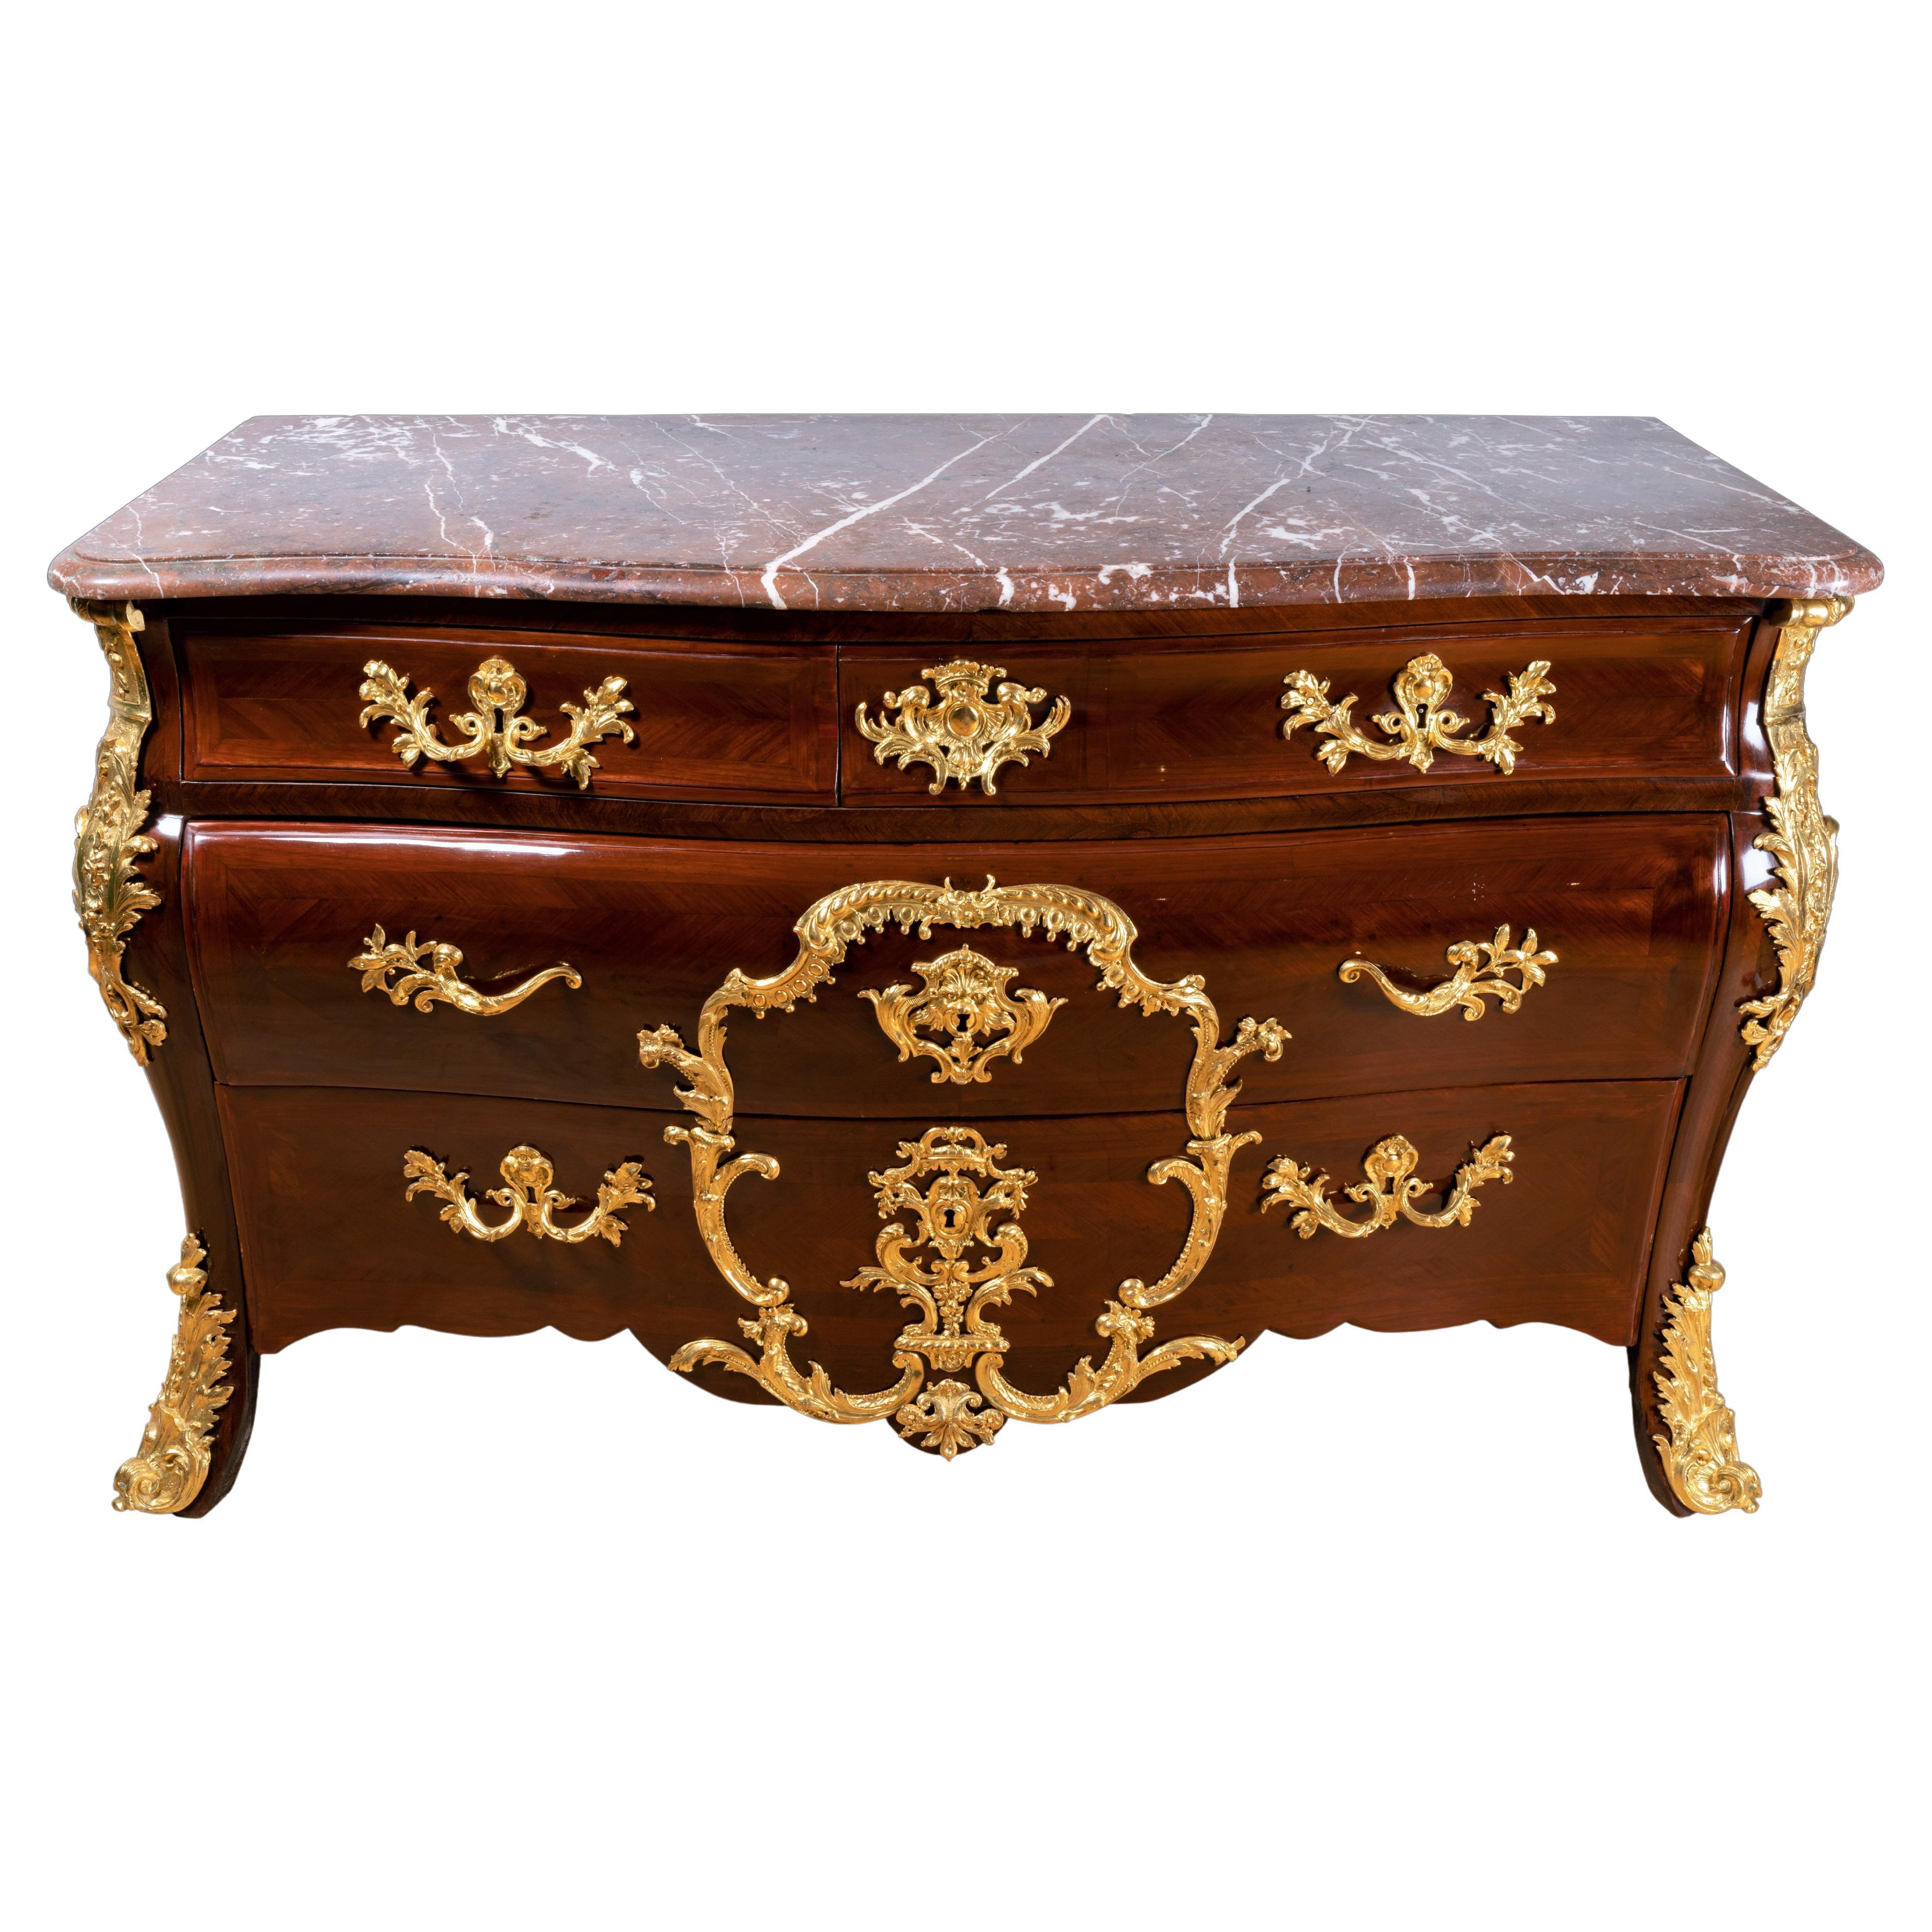 French 18th Century Regence Ormolu-Mounted Commode by Etienne Doirat For Sale